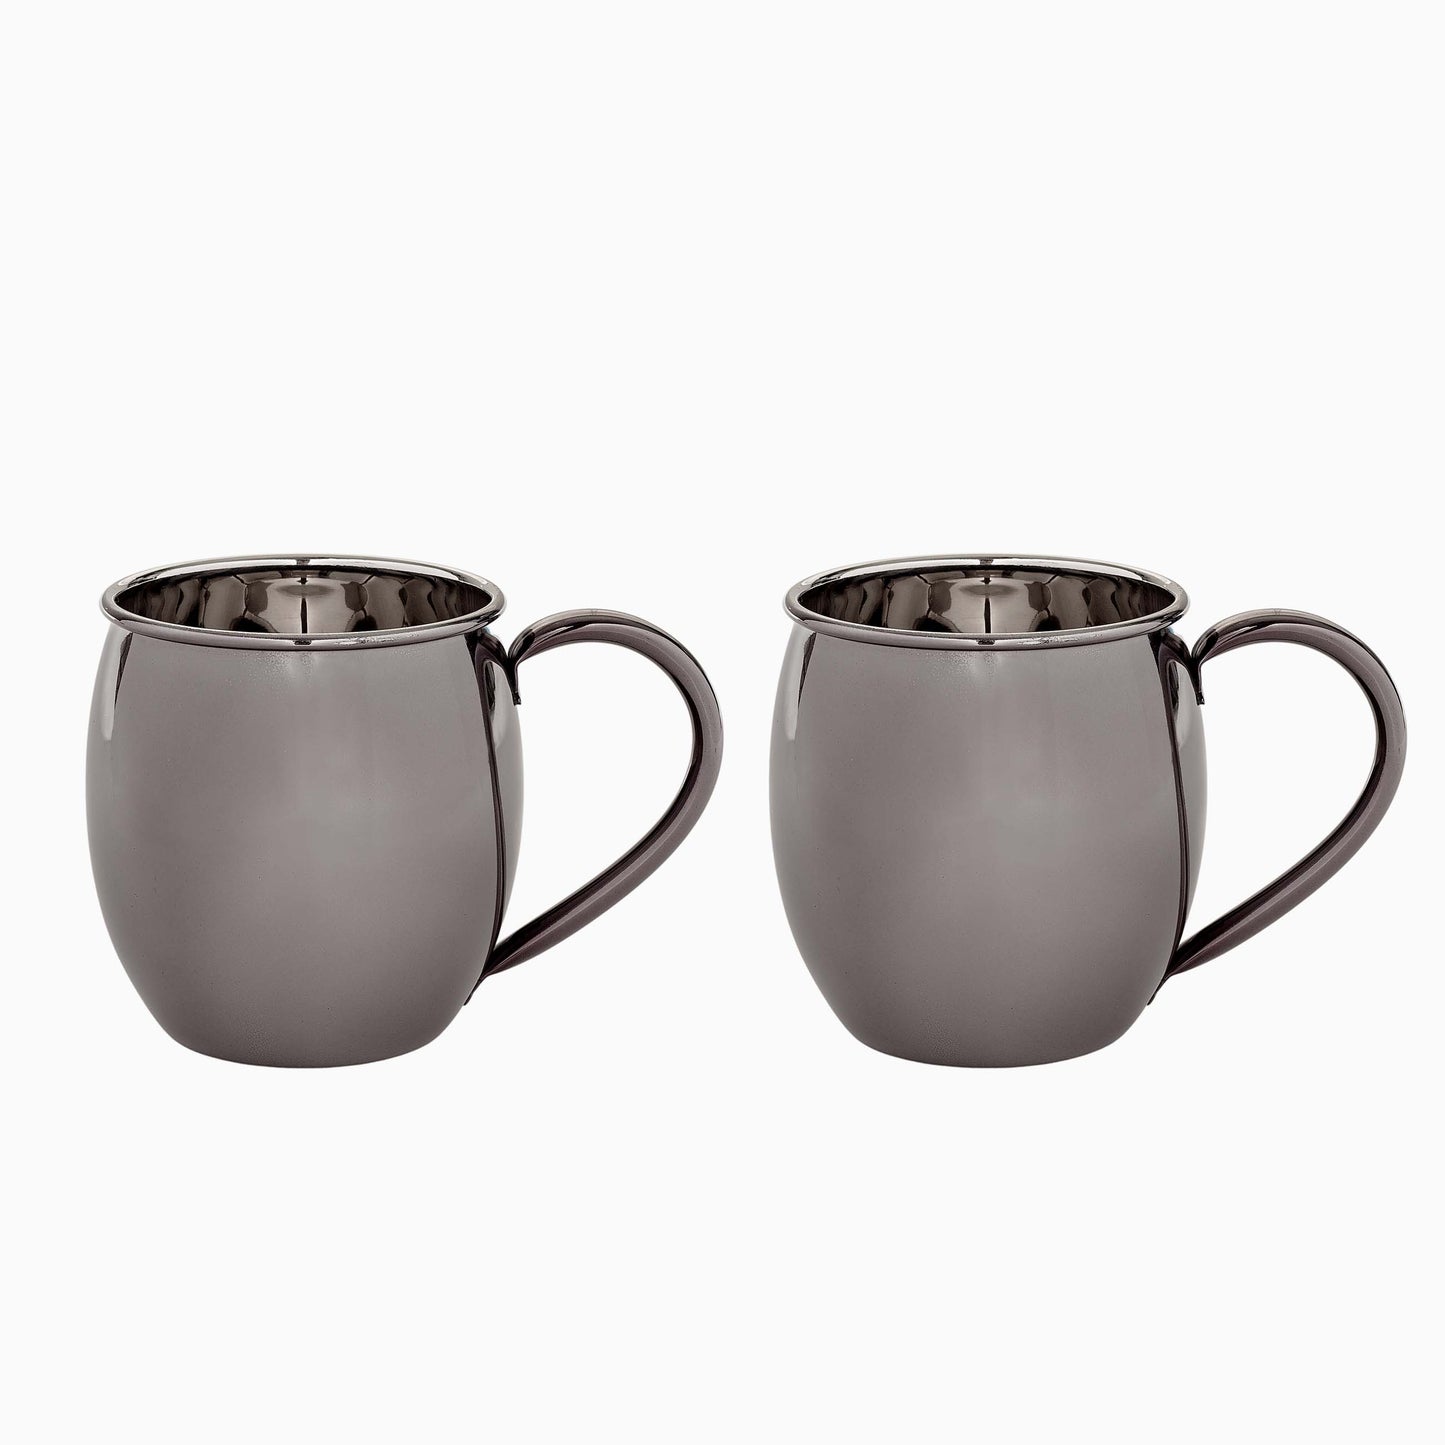 Gunmetal Moscow Mule Mugs (Set of 2) | Product Image | Uncommon James Home